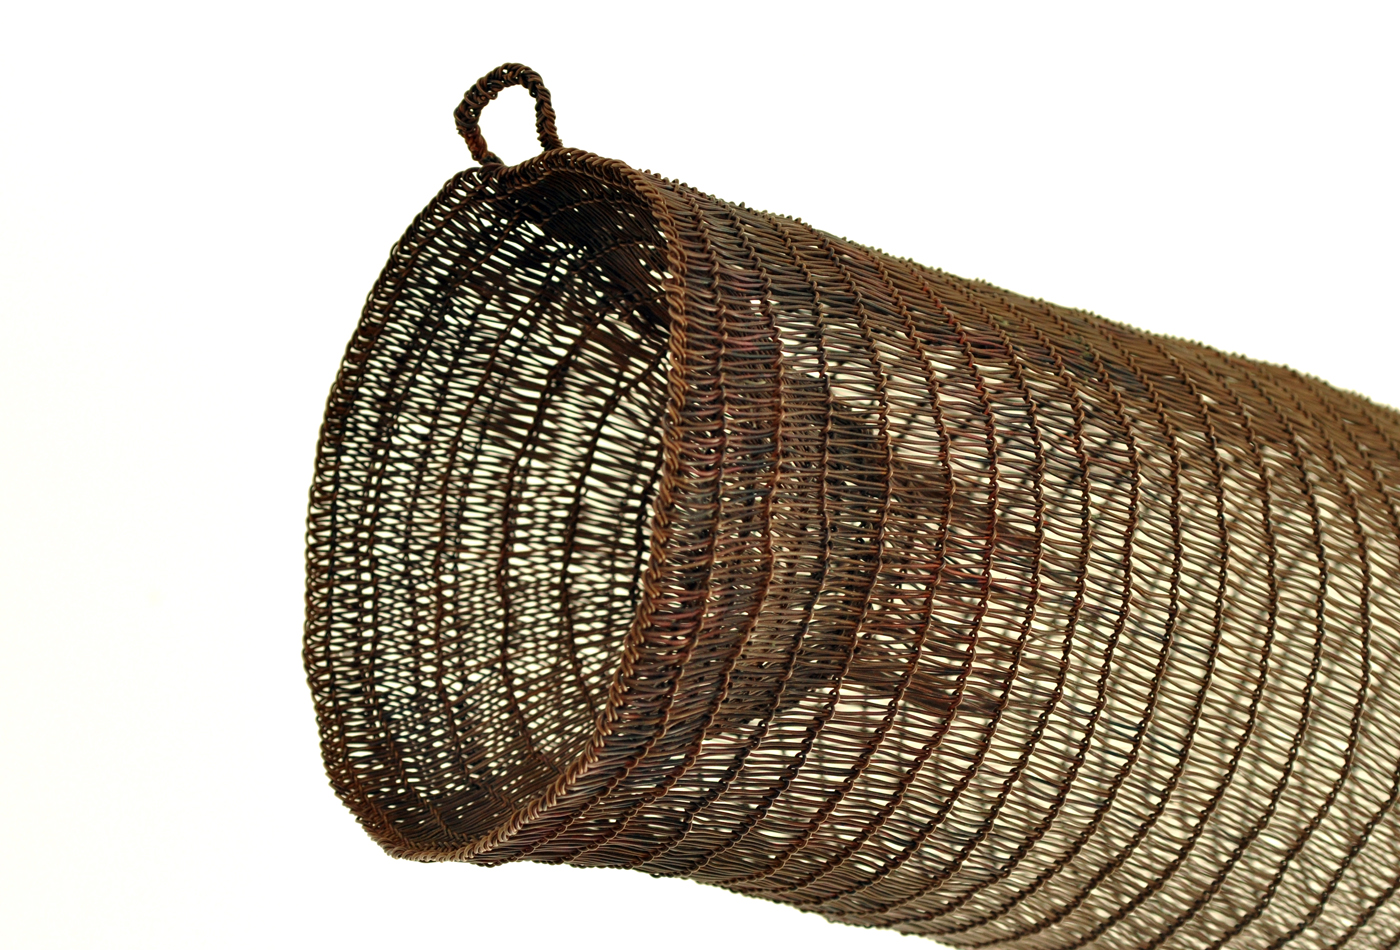 Object: Hinaki (eel/fish trap)  Collections Online - Museum of New